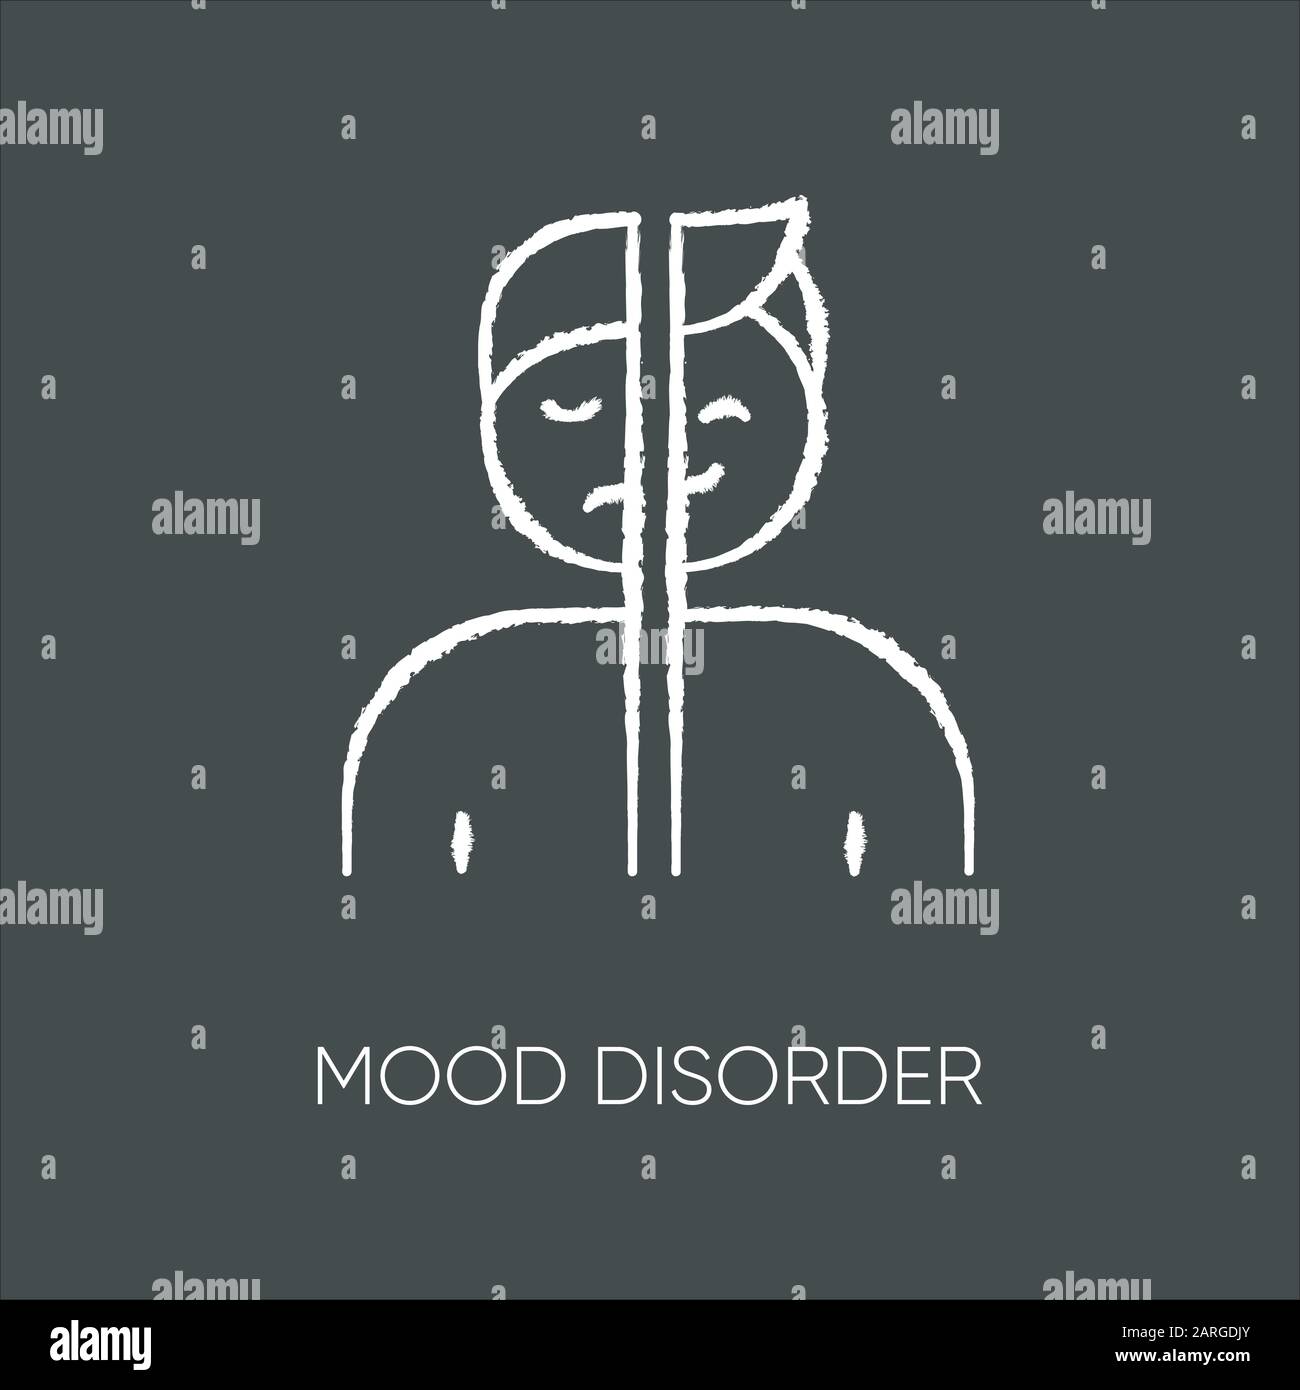 Mood disorder chalk icon. Manic and depressive episodes. Dysthymia, cyclothymia. Emotional swing. Happy and sad. Psychological problem. Mental health. Stock Vector